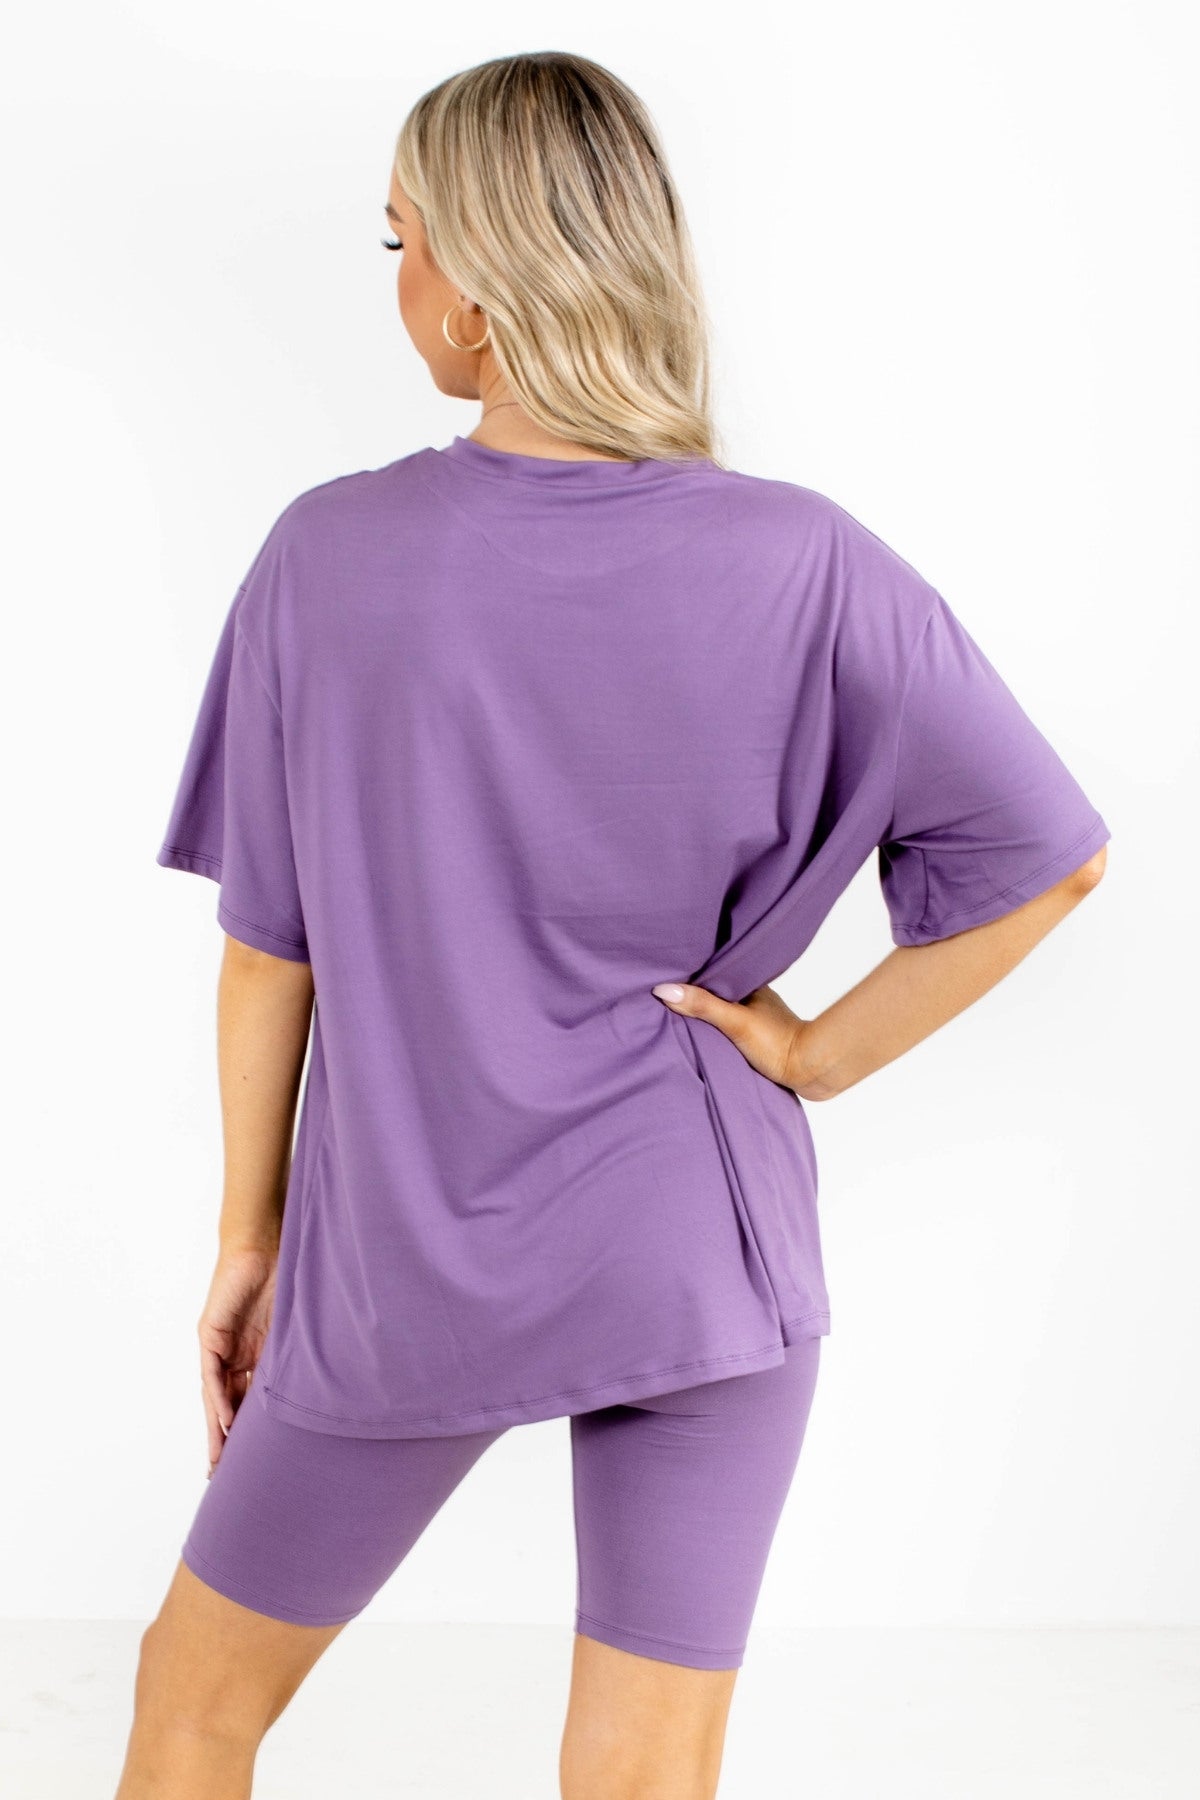 Activewear Set with Oversized Tee and Biker Shorts in Purple for Women